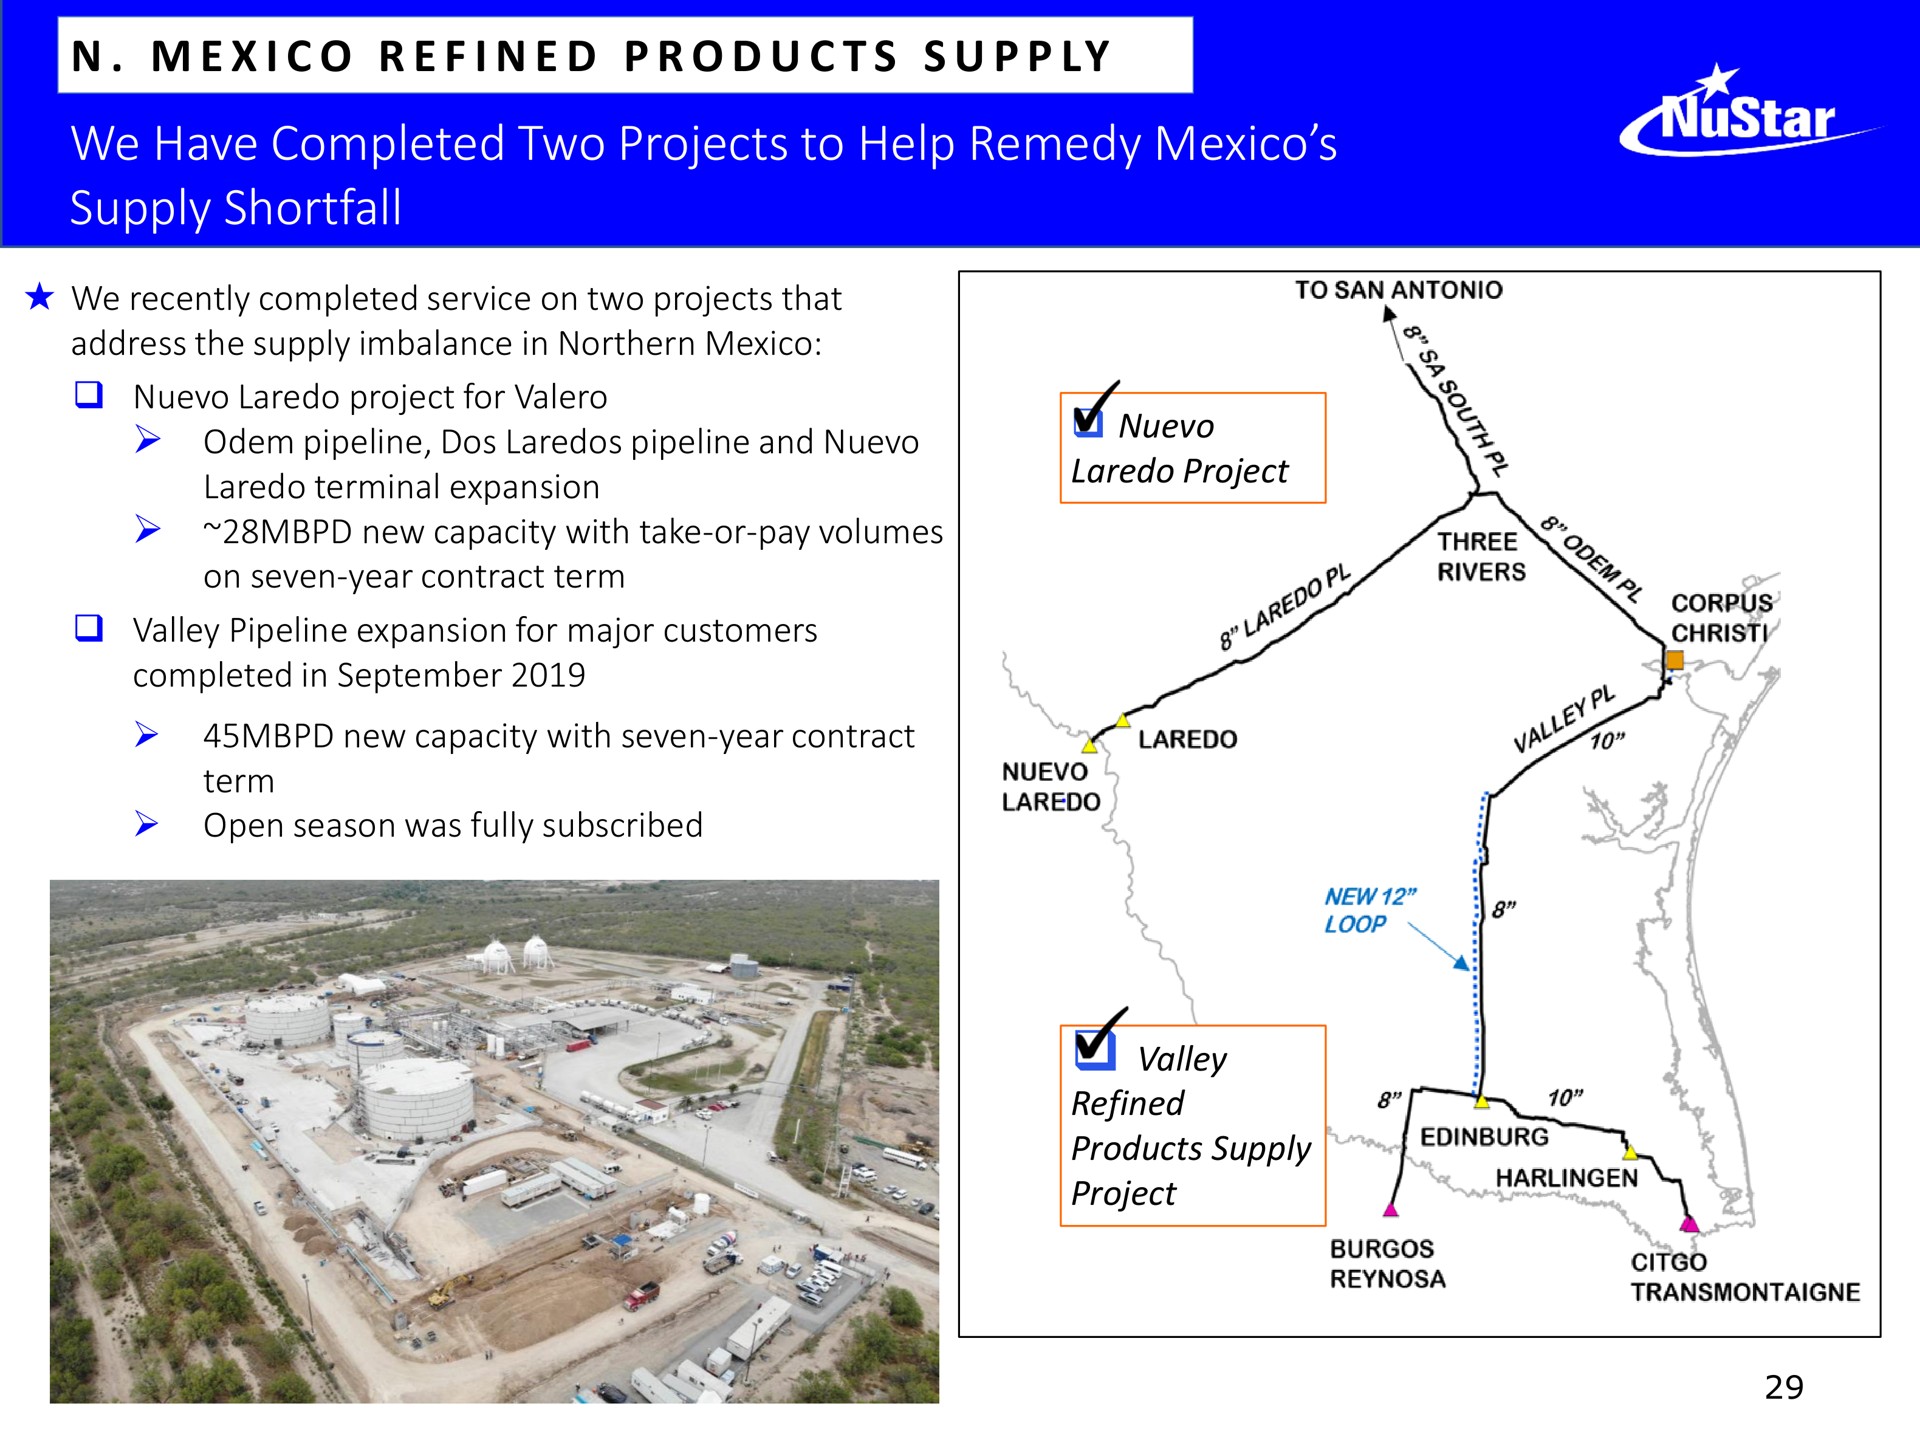 we have completed two projects to help remedy supply shortfall | NuStar Energy